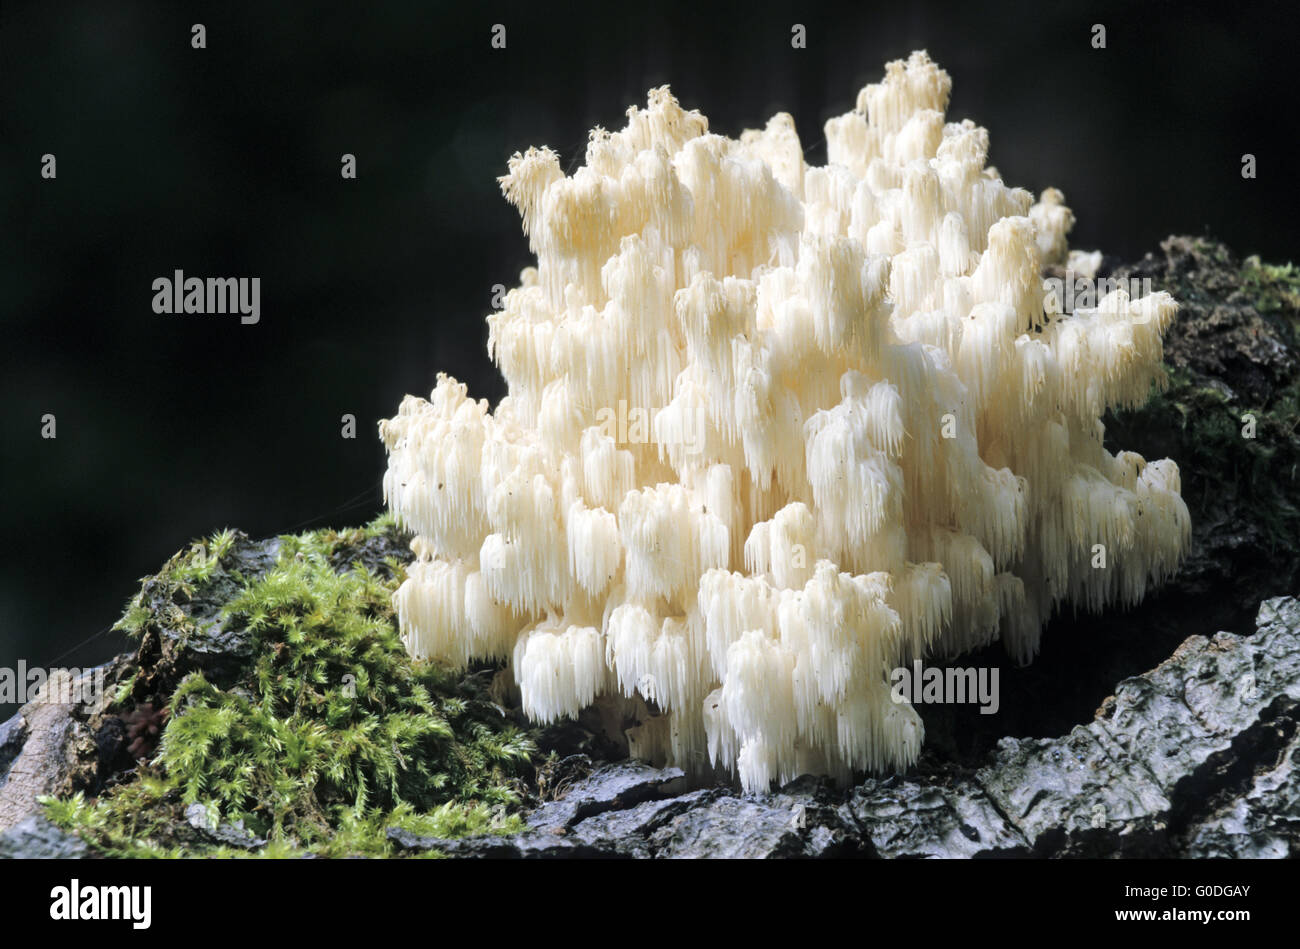 Coral Tooth Fungus grows on dead hardwood Stock Photo